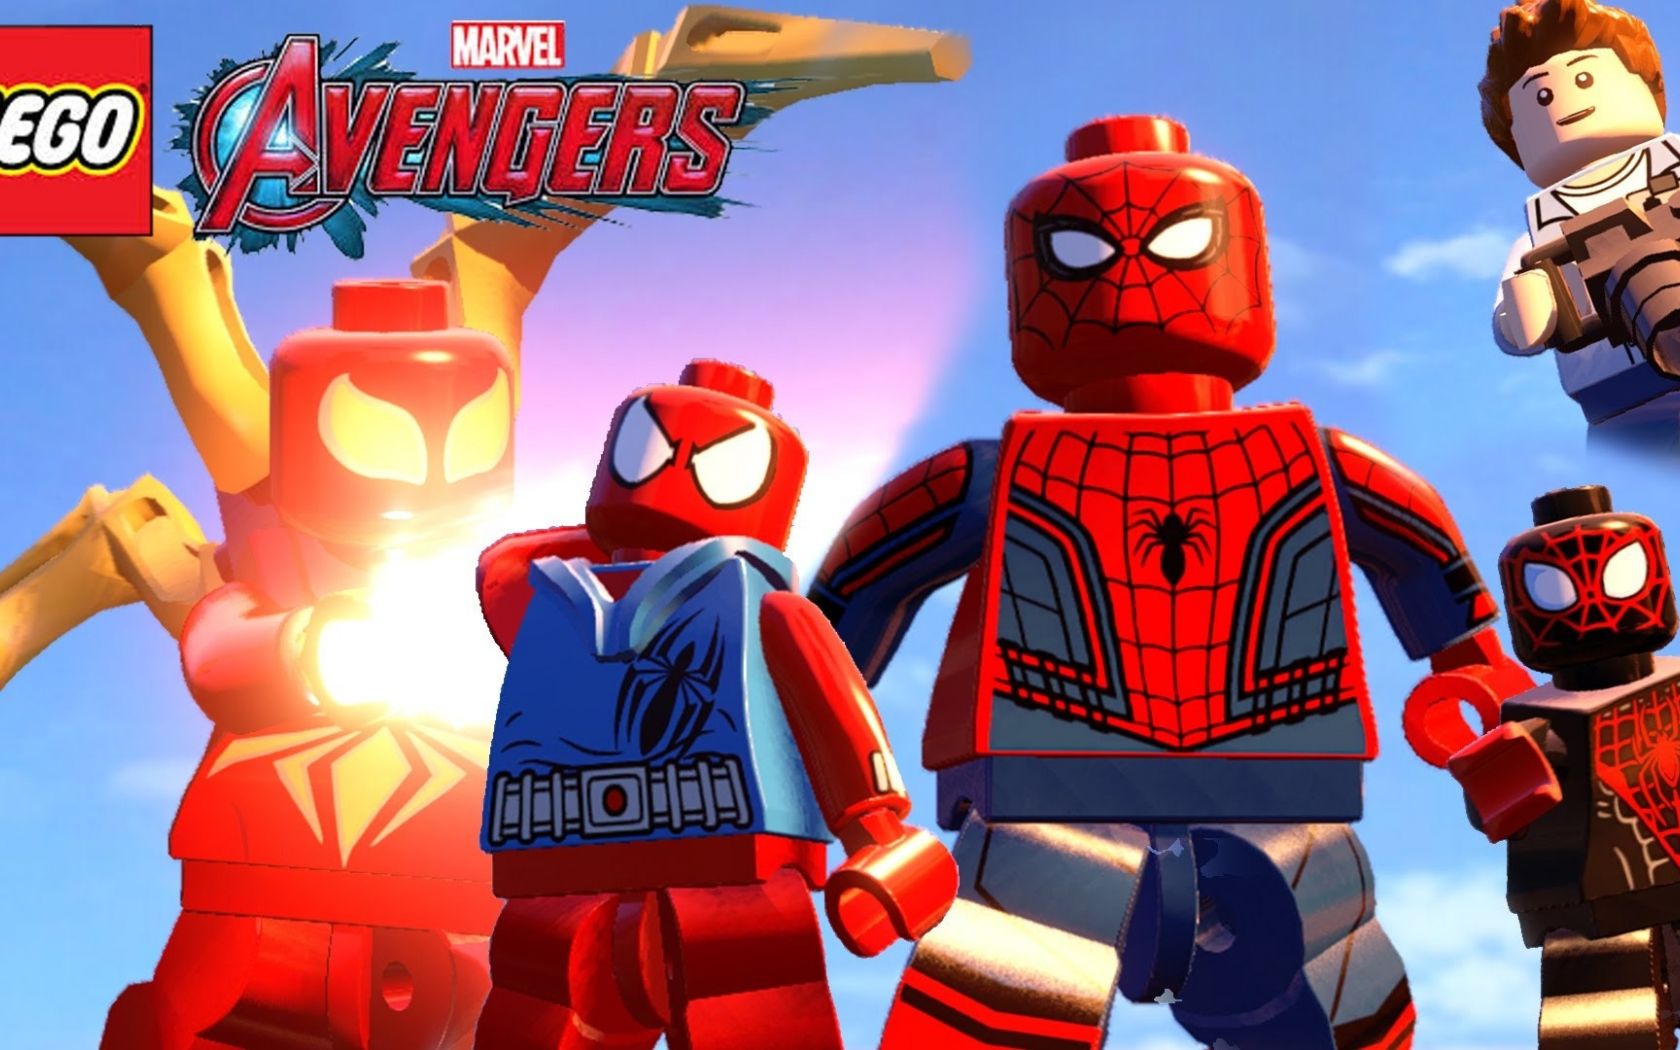 lego marvel avengers pc spider-man character pack download